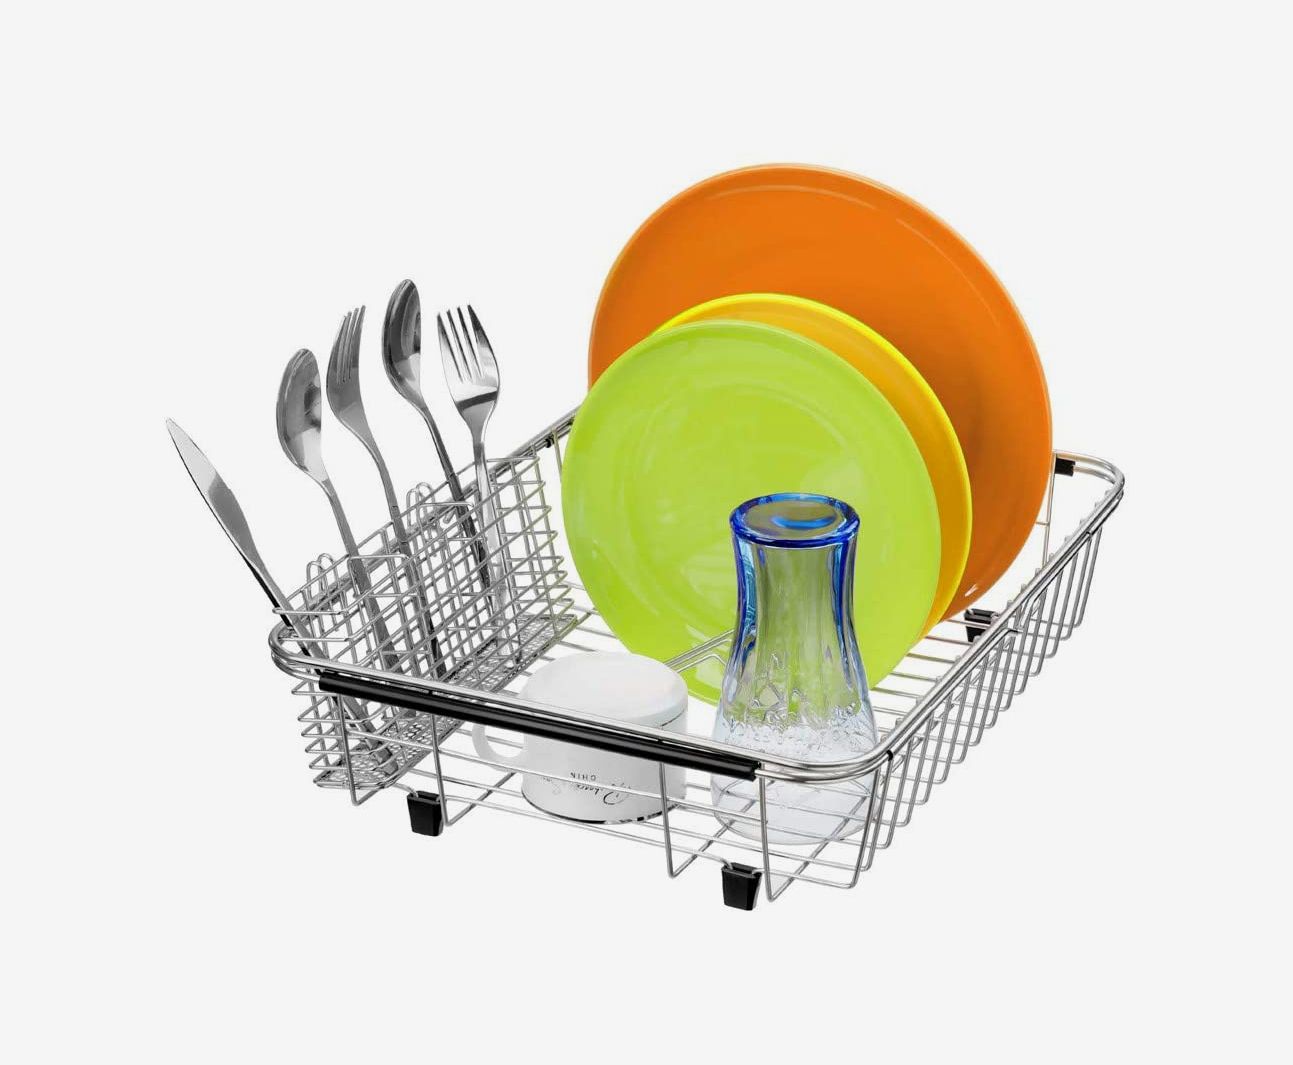 Chrome Simple Houseware Over Sink Counter Top Dish Drainer Drying Rack